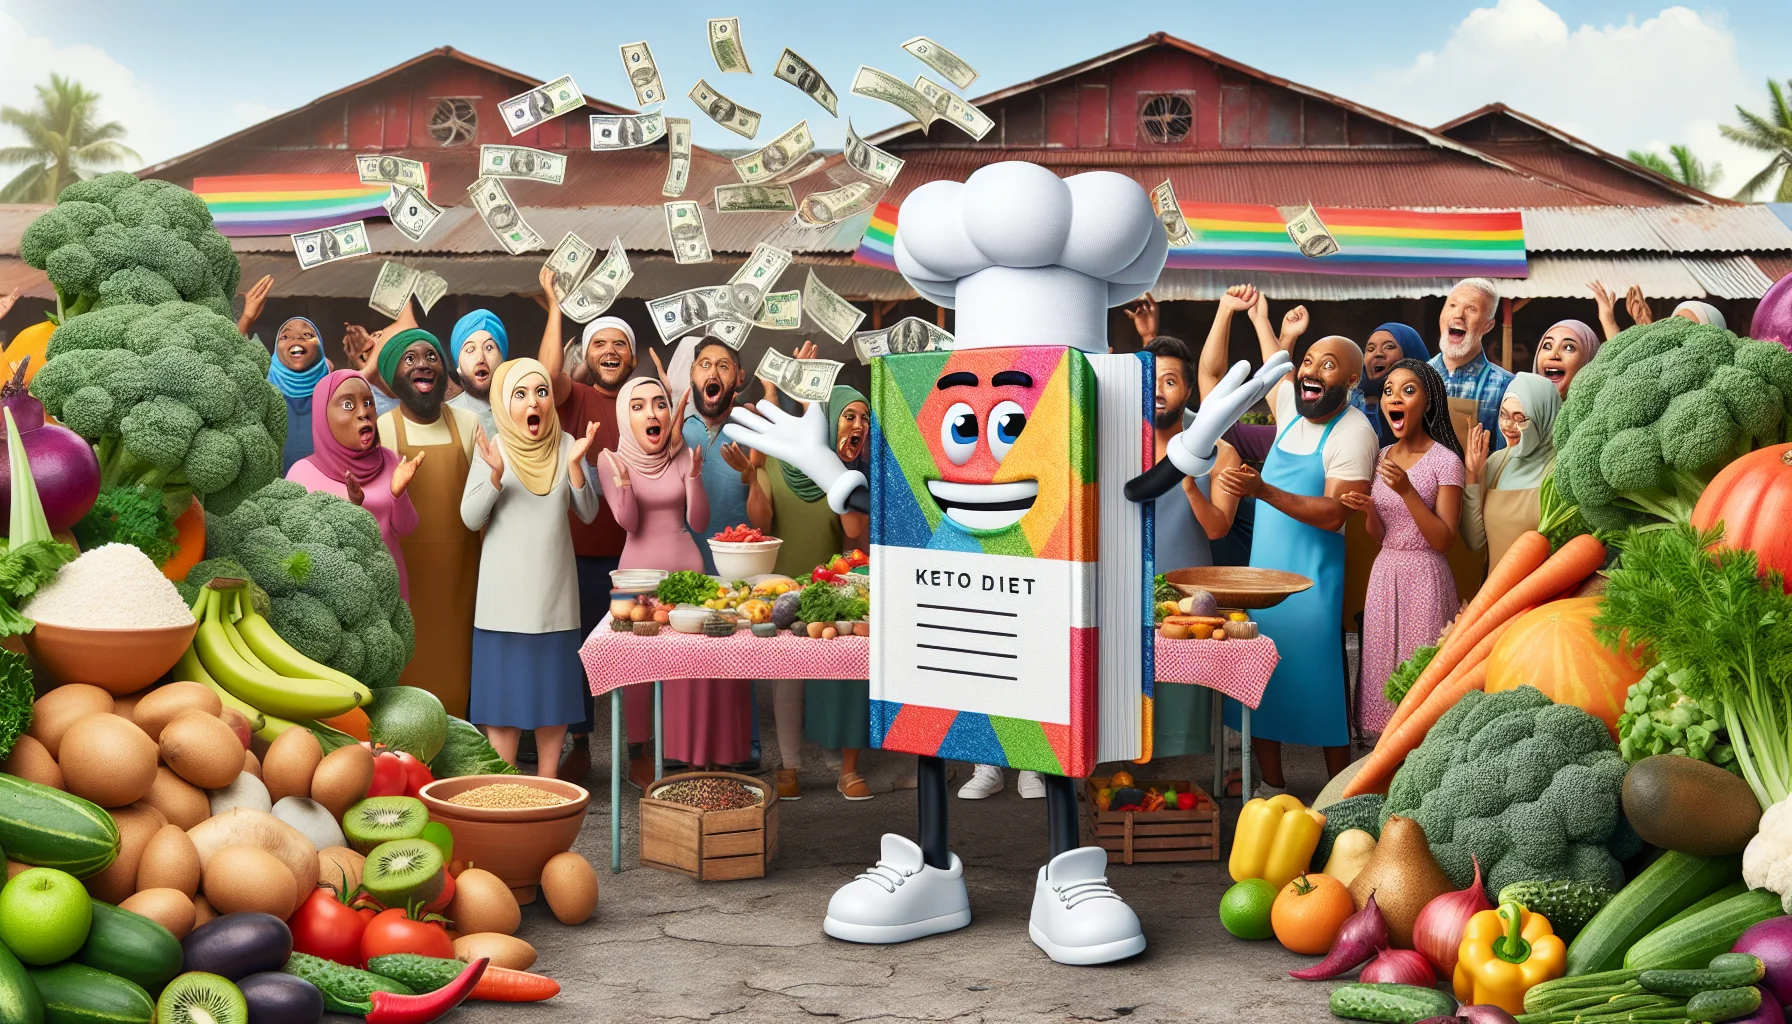 Create a humorous and realistic scene where a Keto Diet Recipe Book is personified. Decked out in a colorful chef's outfit with vegetables and fruits as accessories, it is haggling at a traditional market. Rainbow-colored currency notes are flying as it gets fresh ingredients for cheap deals, while a diverse crowd of amazed onlookers with people of Caucasian, Hispanic, Black, Middle-Eastern, and South Asian descents watches with smiles and wide eyes. All around, visual metaphors of health and prosperity enhance the scene. This image uniquely highlights the idea of eating healthily for less.